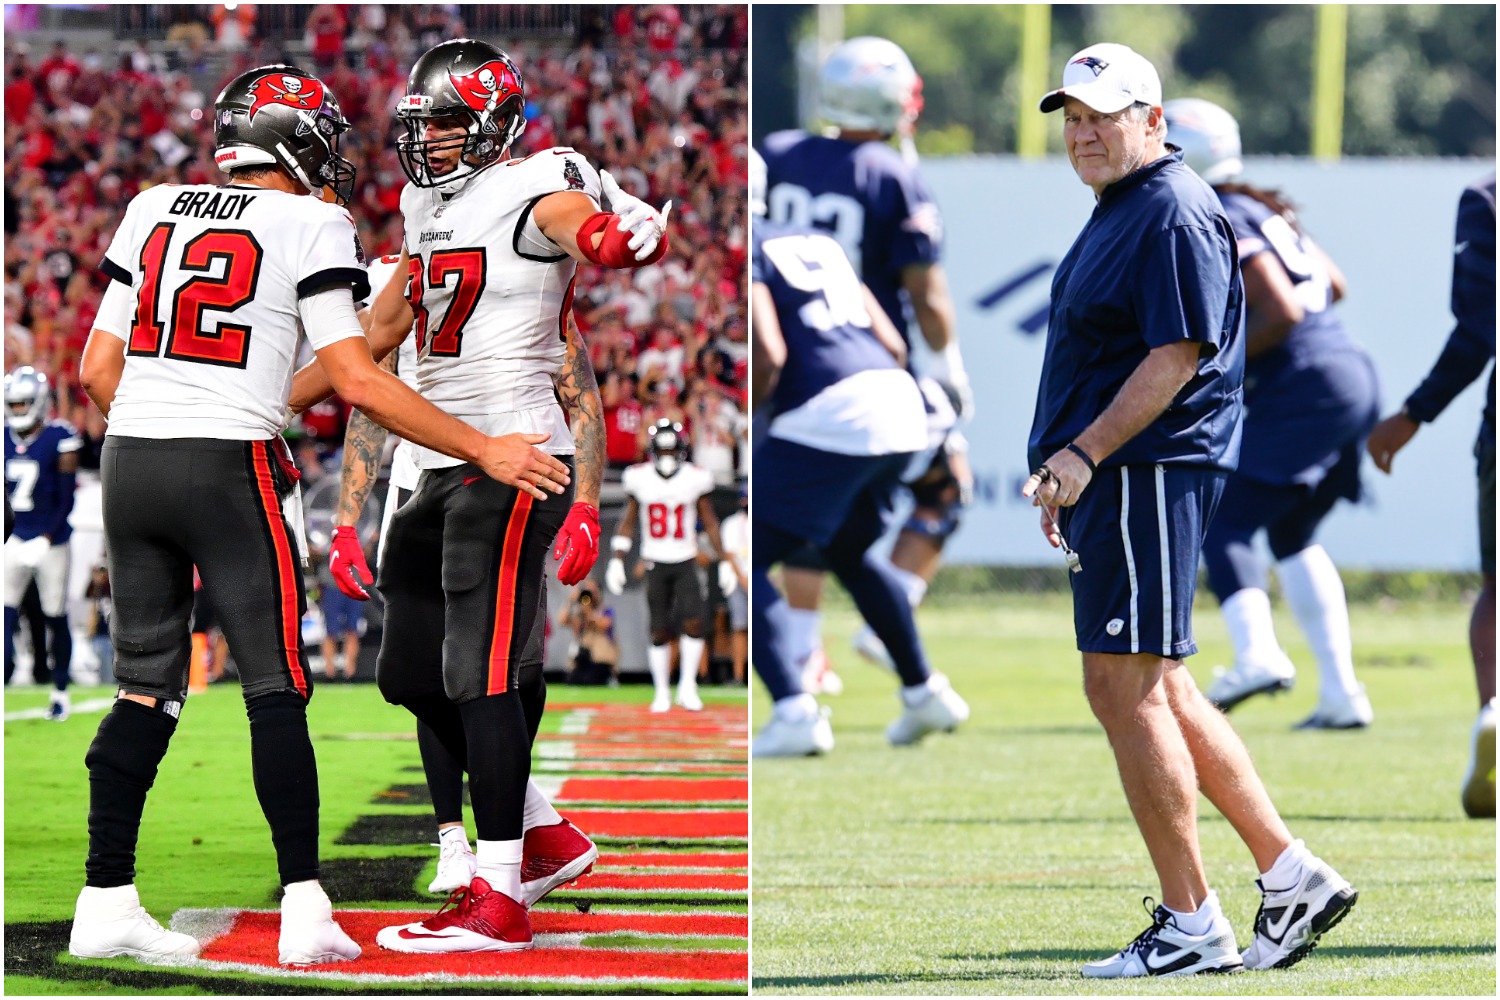 Tampa Bay Buccaneers teammates Tom Brady and Rob Gronkowski celebrate scoring a touchdown as New England Patriots head coach Bill Belichick watches his team practice.